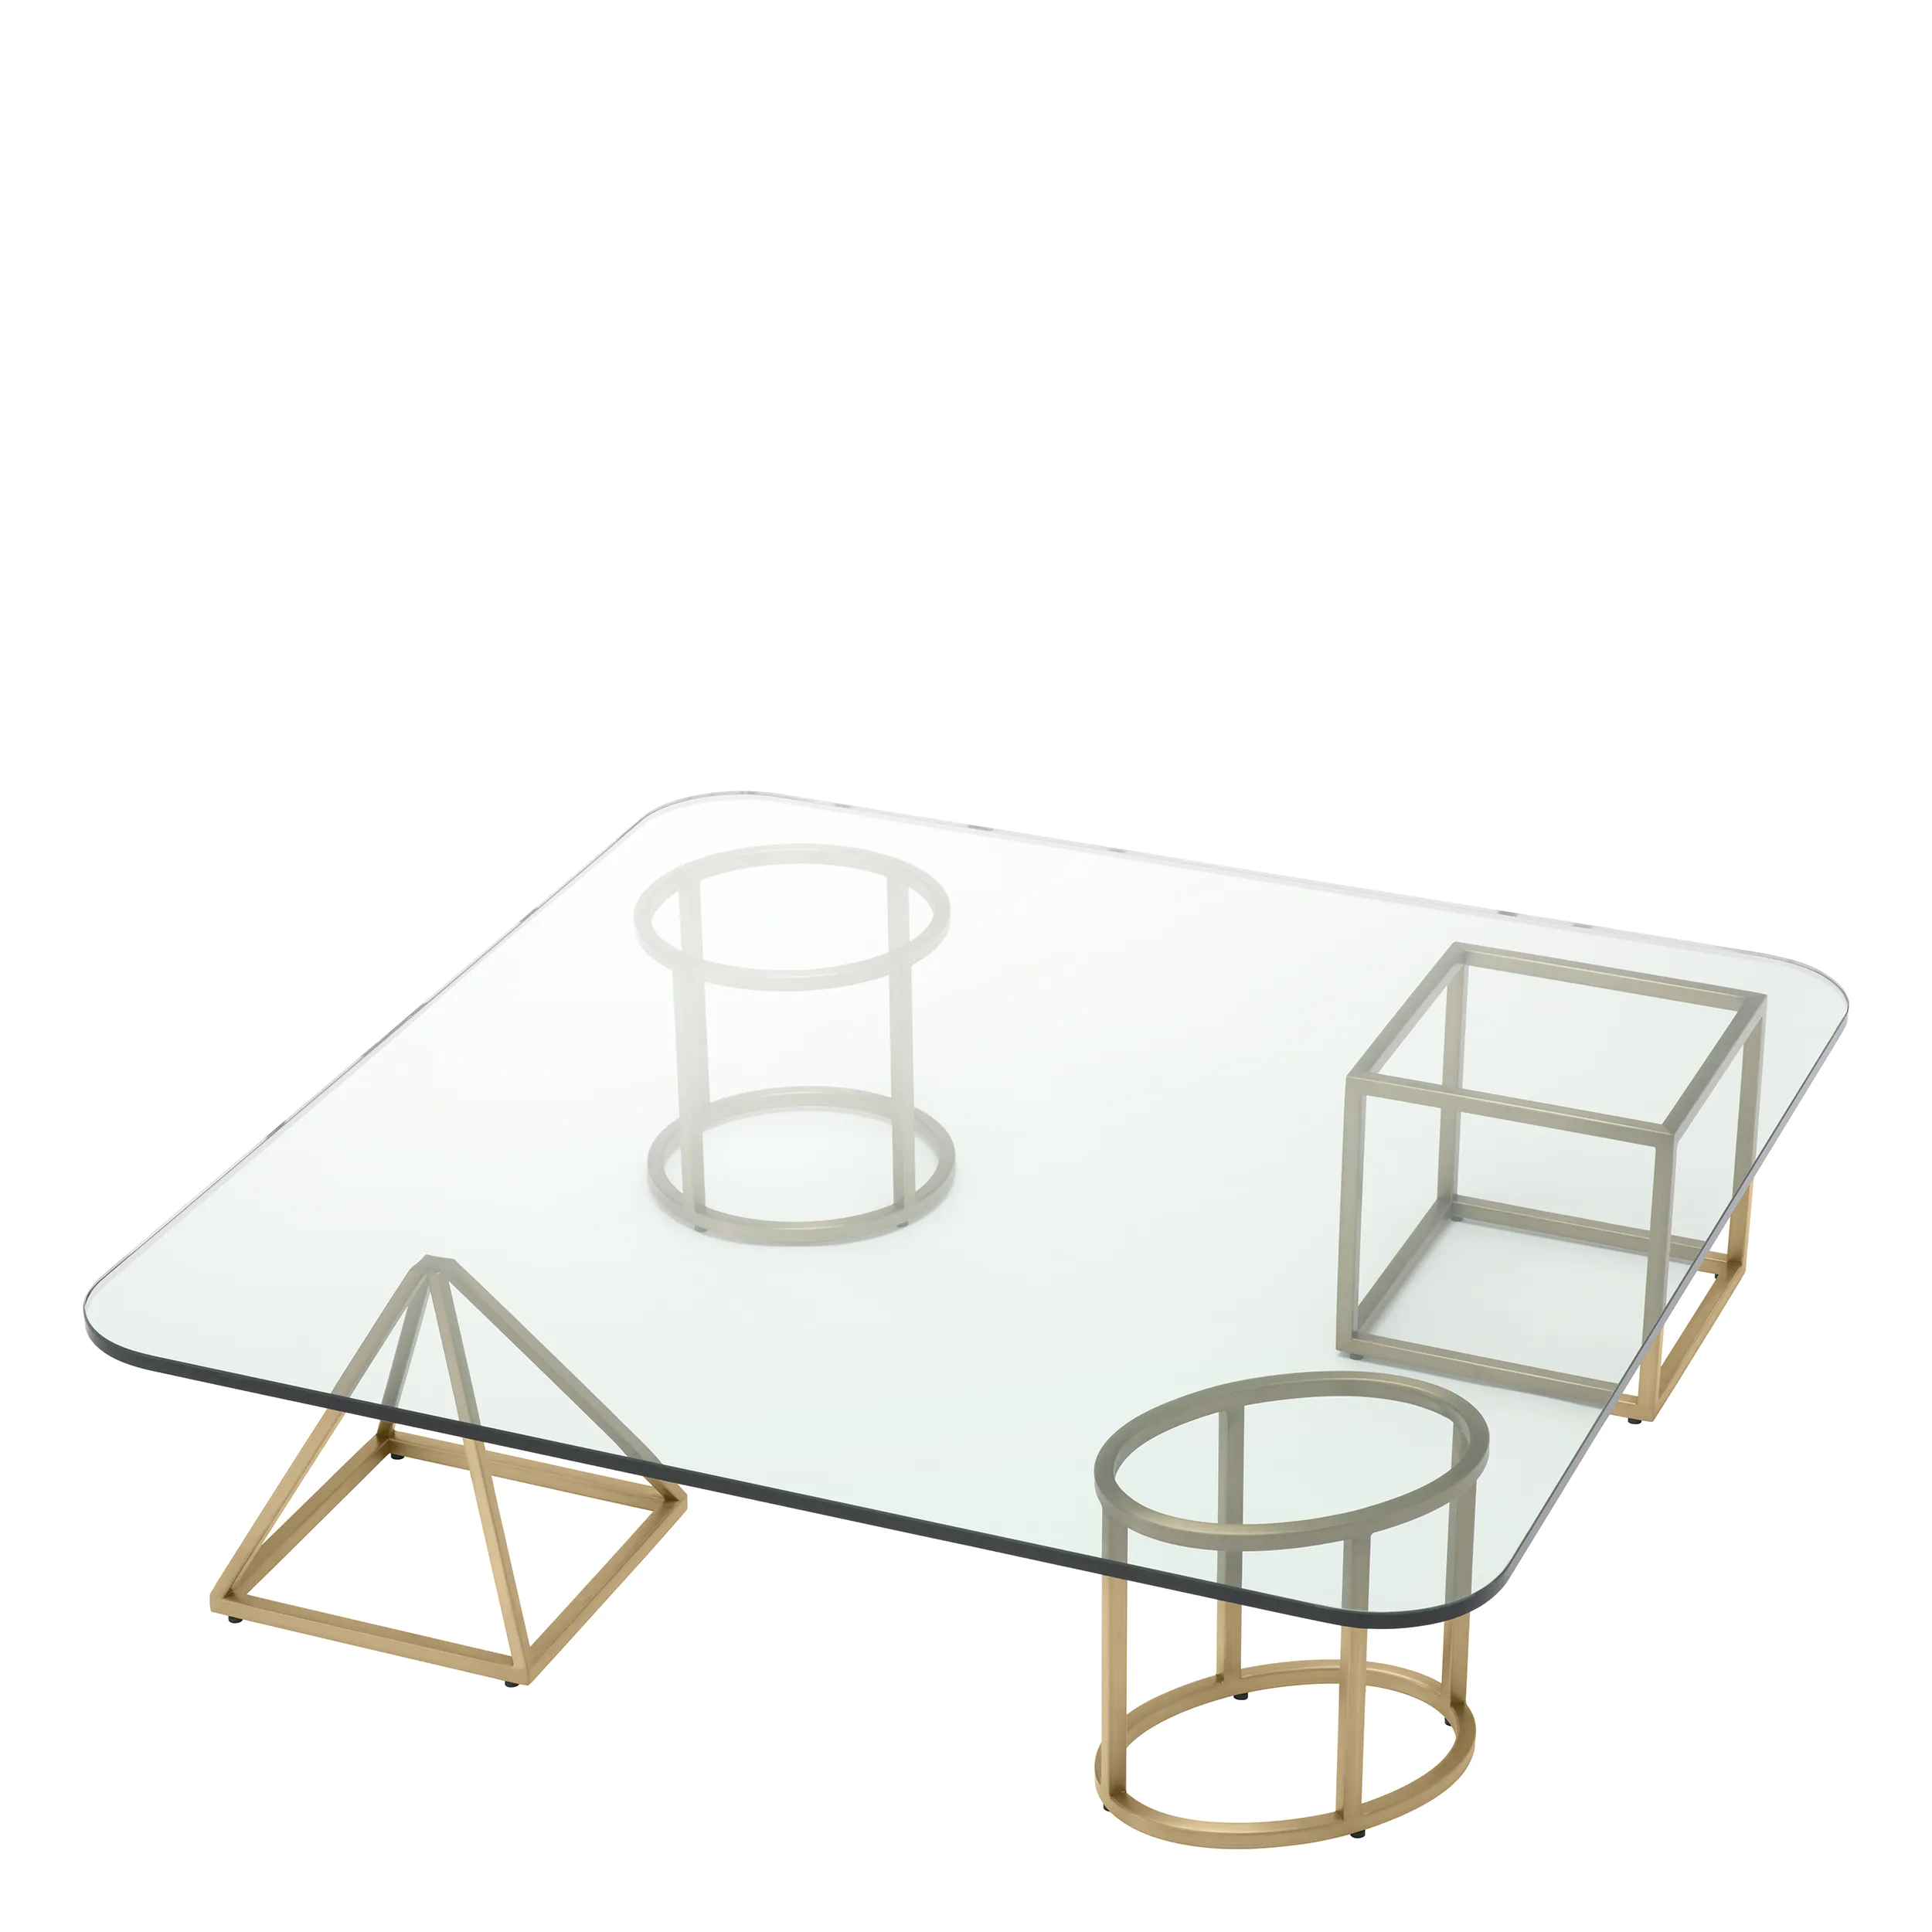 Speise Coffee Table Brushed Brass Eichholtz-116386-21id